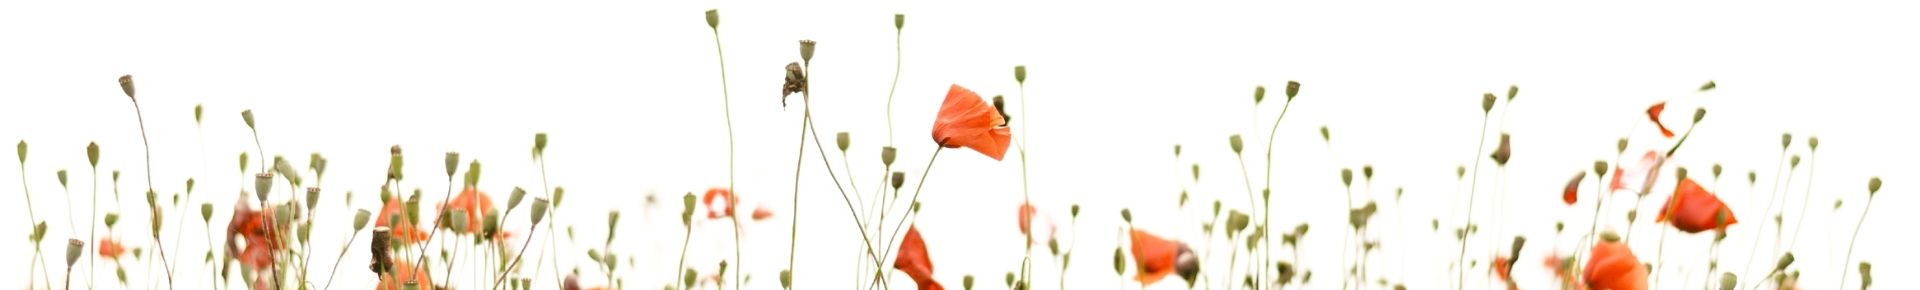 field of poppies on white background